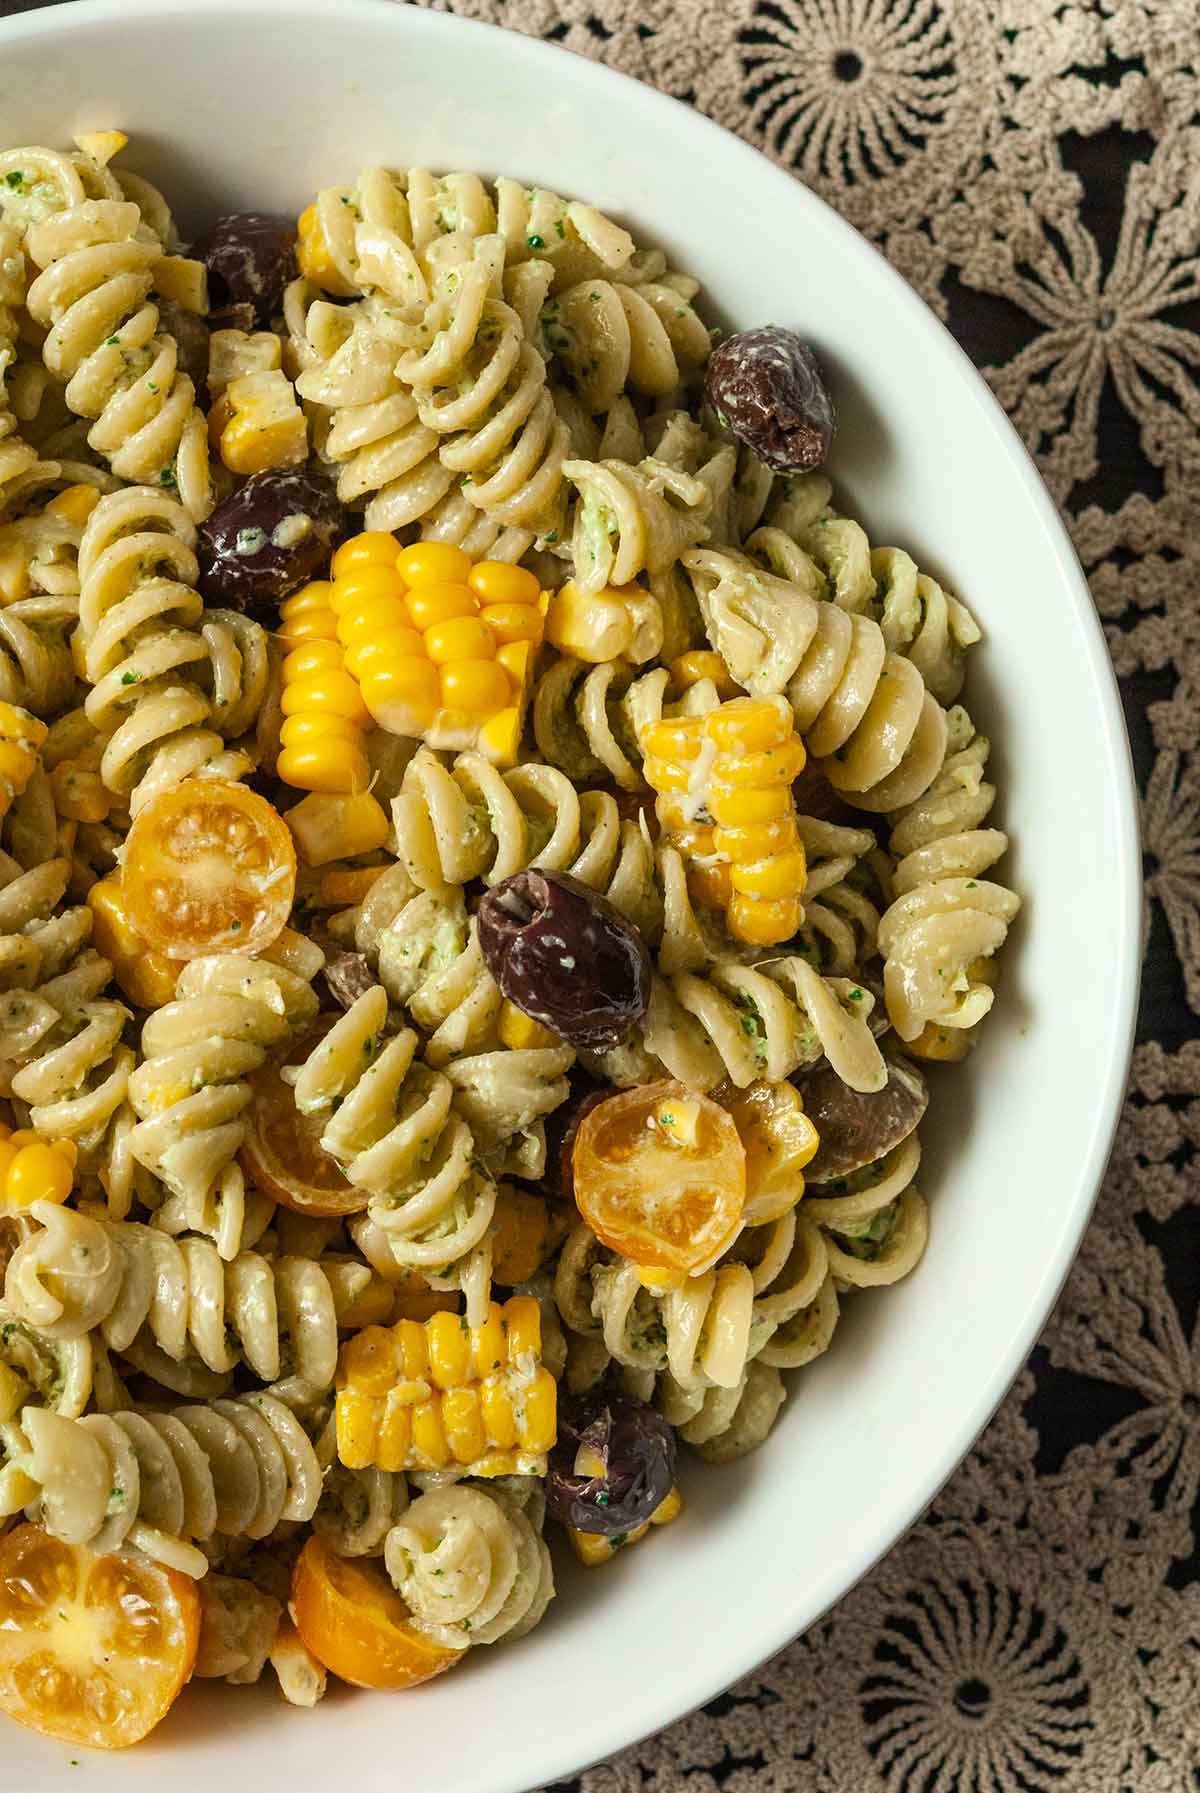 A bowl of pesto pasta salad with corn, olives, cherry tomatoes and mozzarella.